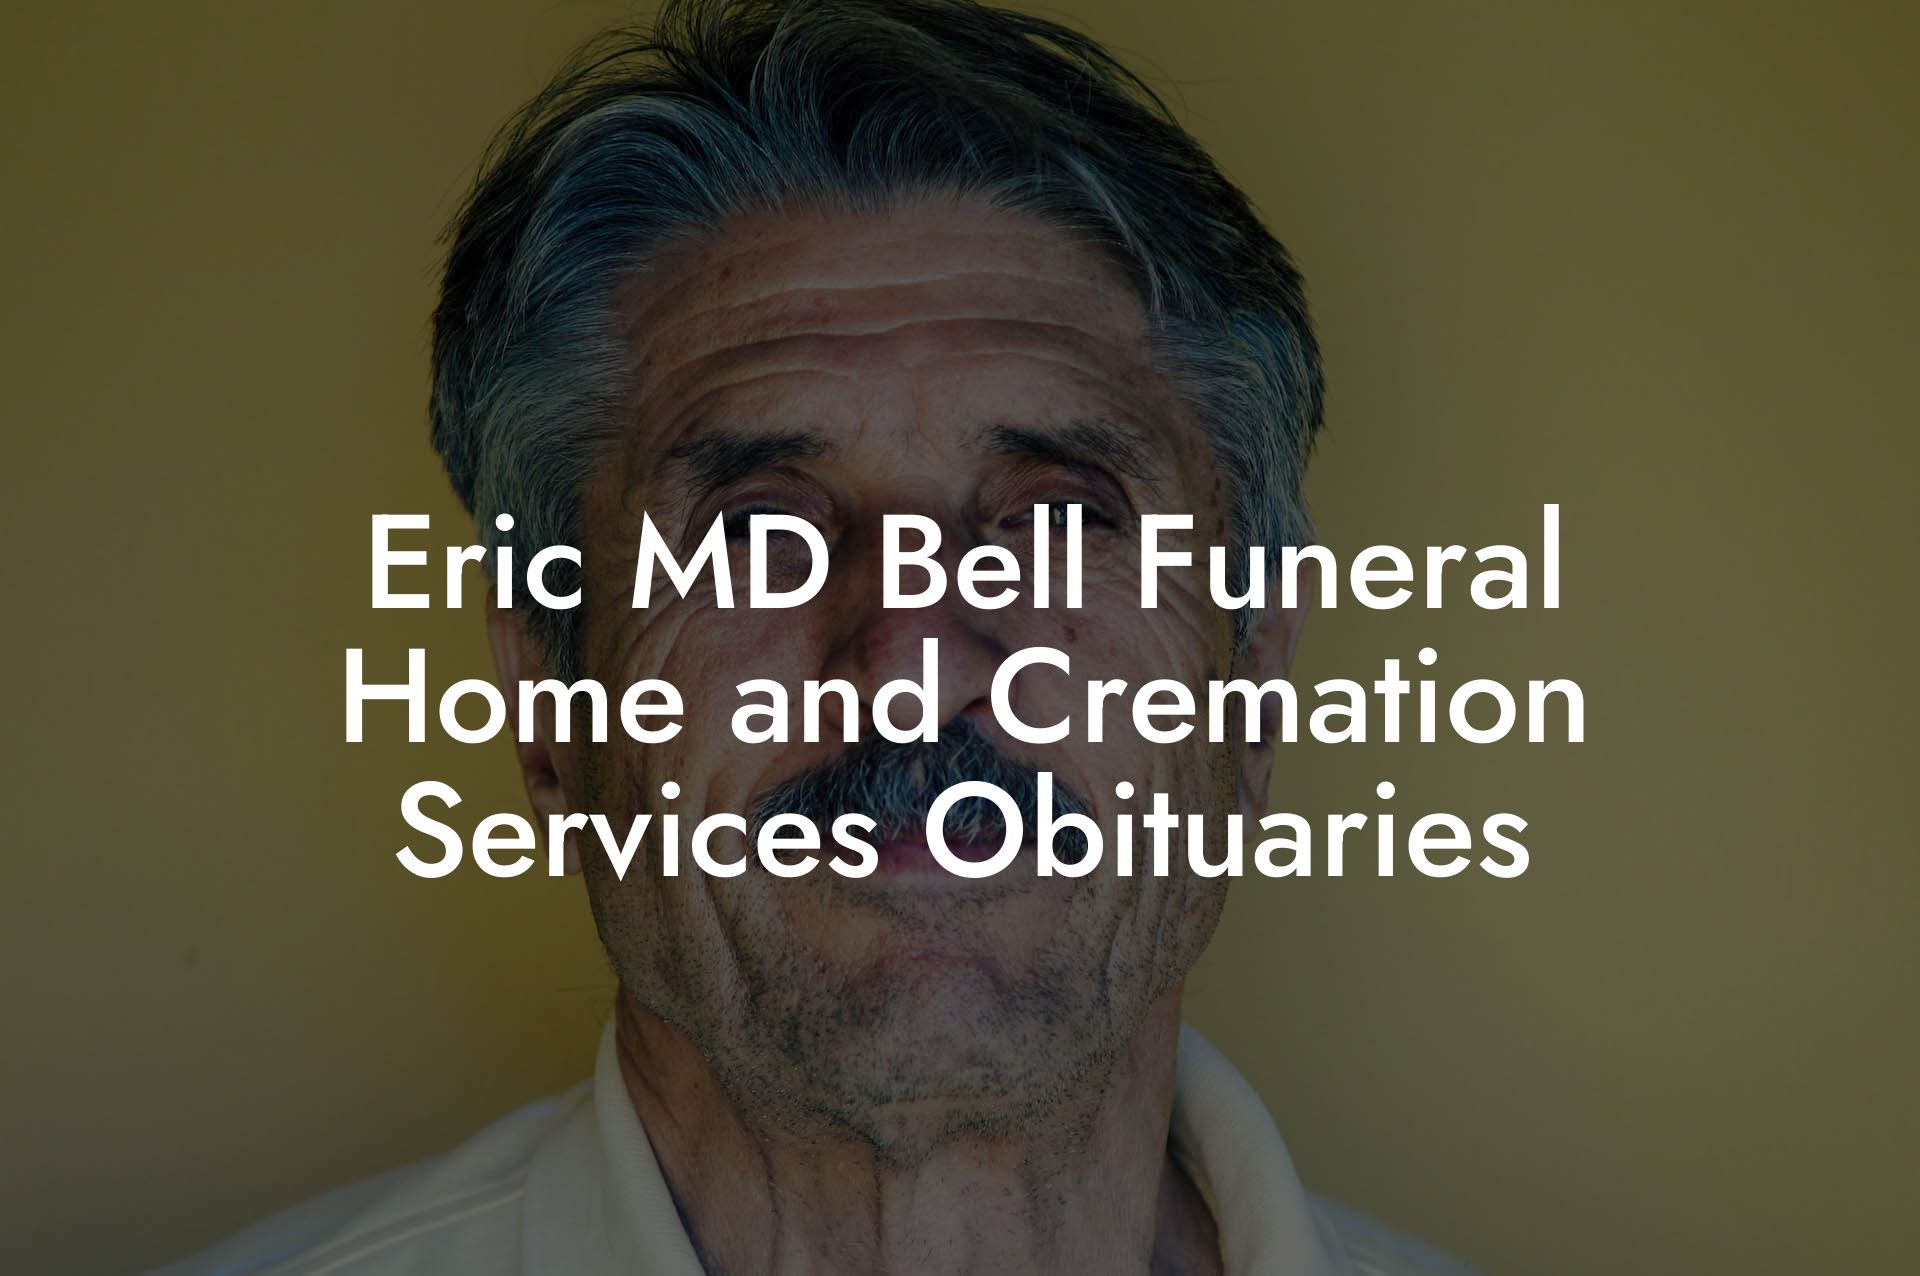 Eric MD Bell Funeral Home and Cremation Services Obituaries